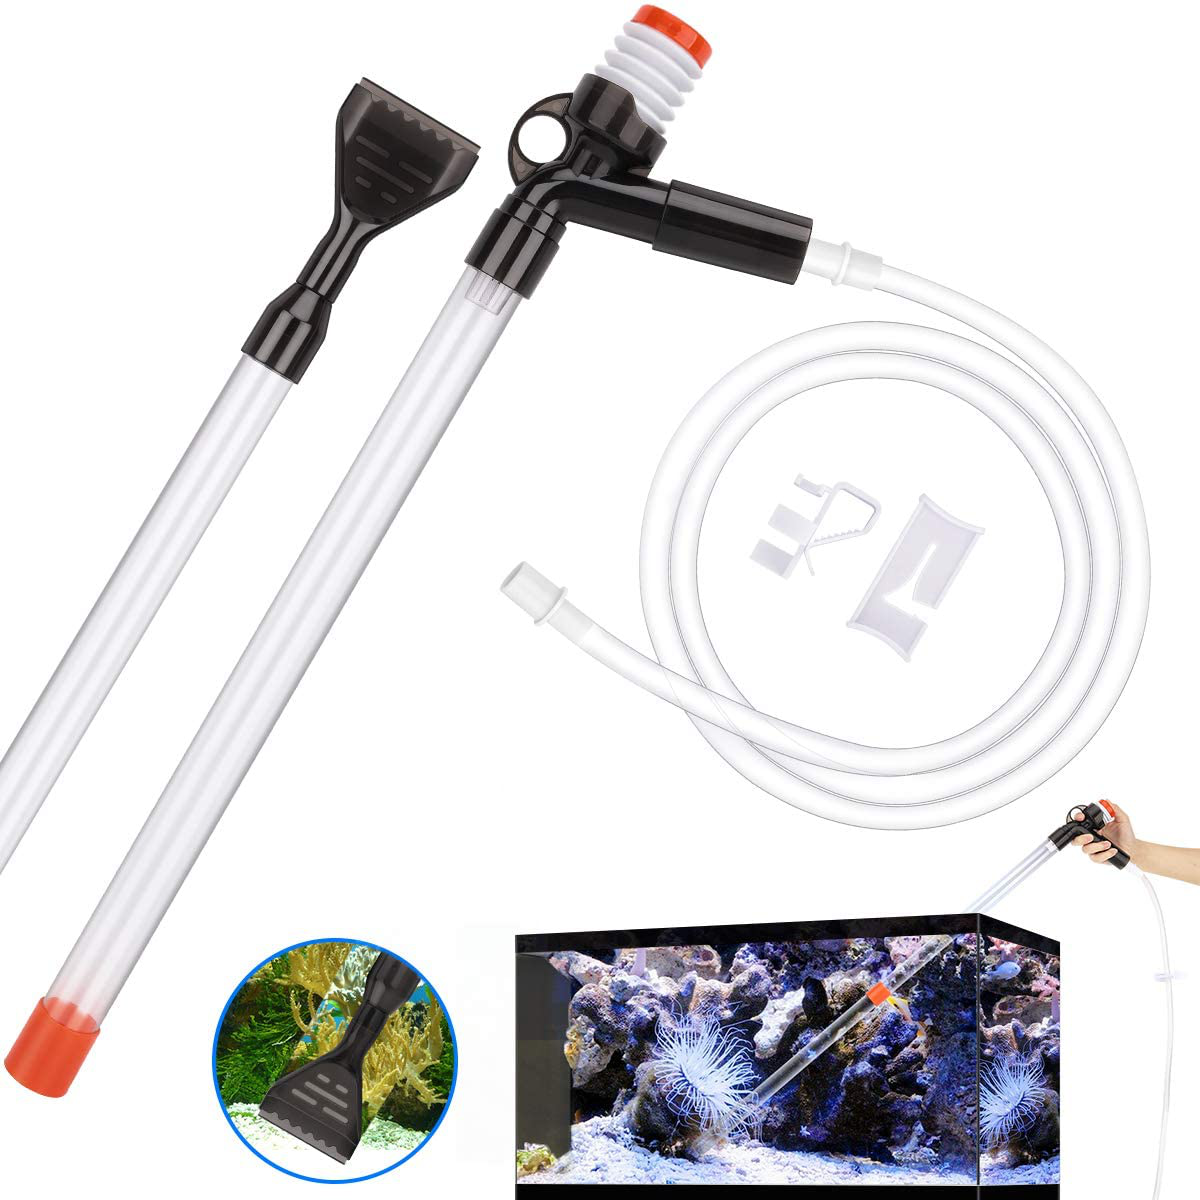 Vavopaw Fish Tank Cleaner, 5 in 1 Quick Water Changer Aquarium Cleaning Accessories, Aquarium Siphon Vacuum Gravel Cleaner Kit with Air-Pressing Button, Glass Scraper and Water Flow Controller, Black Animals & Pet Supplies > Pet Supplies > Fish Supplies > Aquarium Cleaning Supplies VavoPaw   